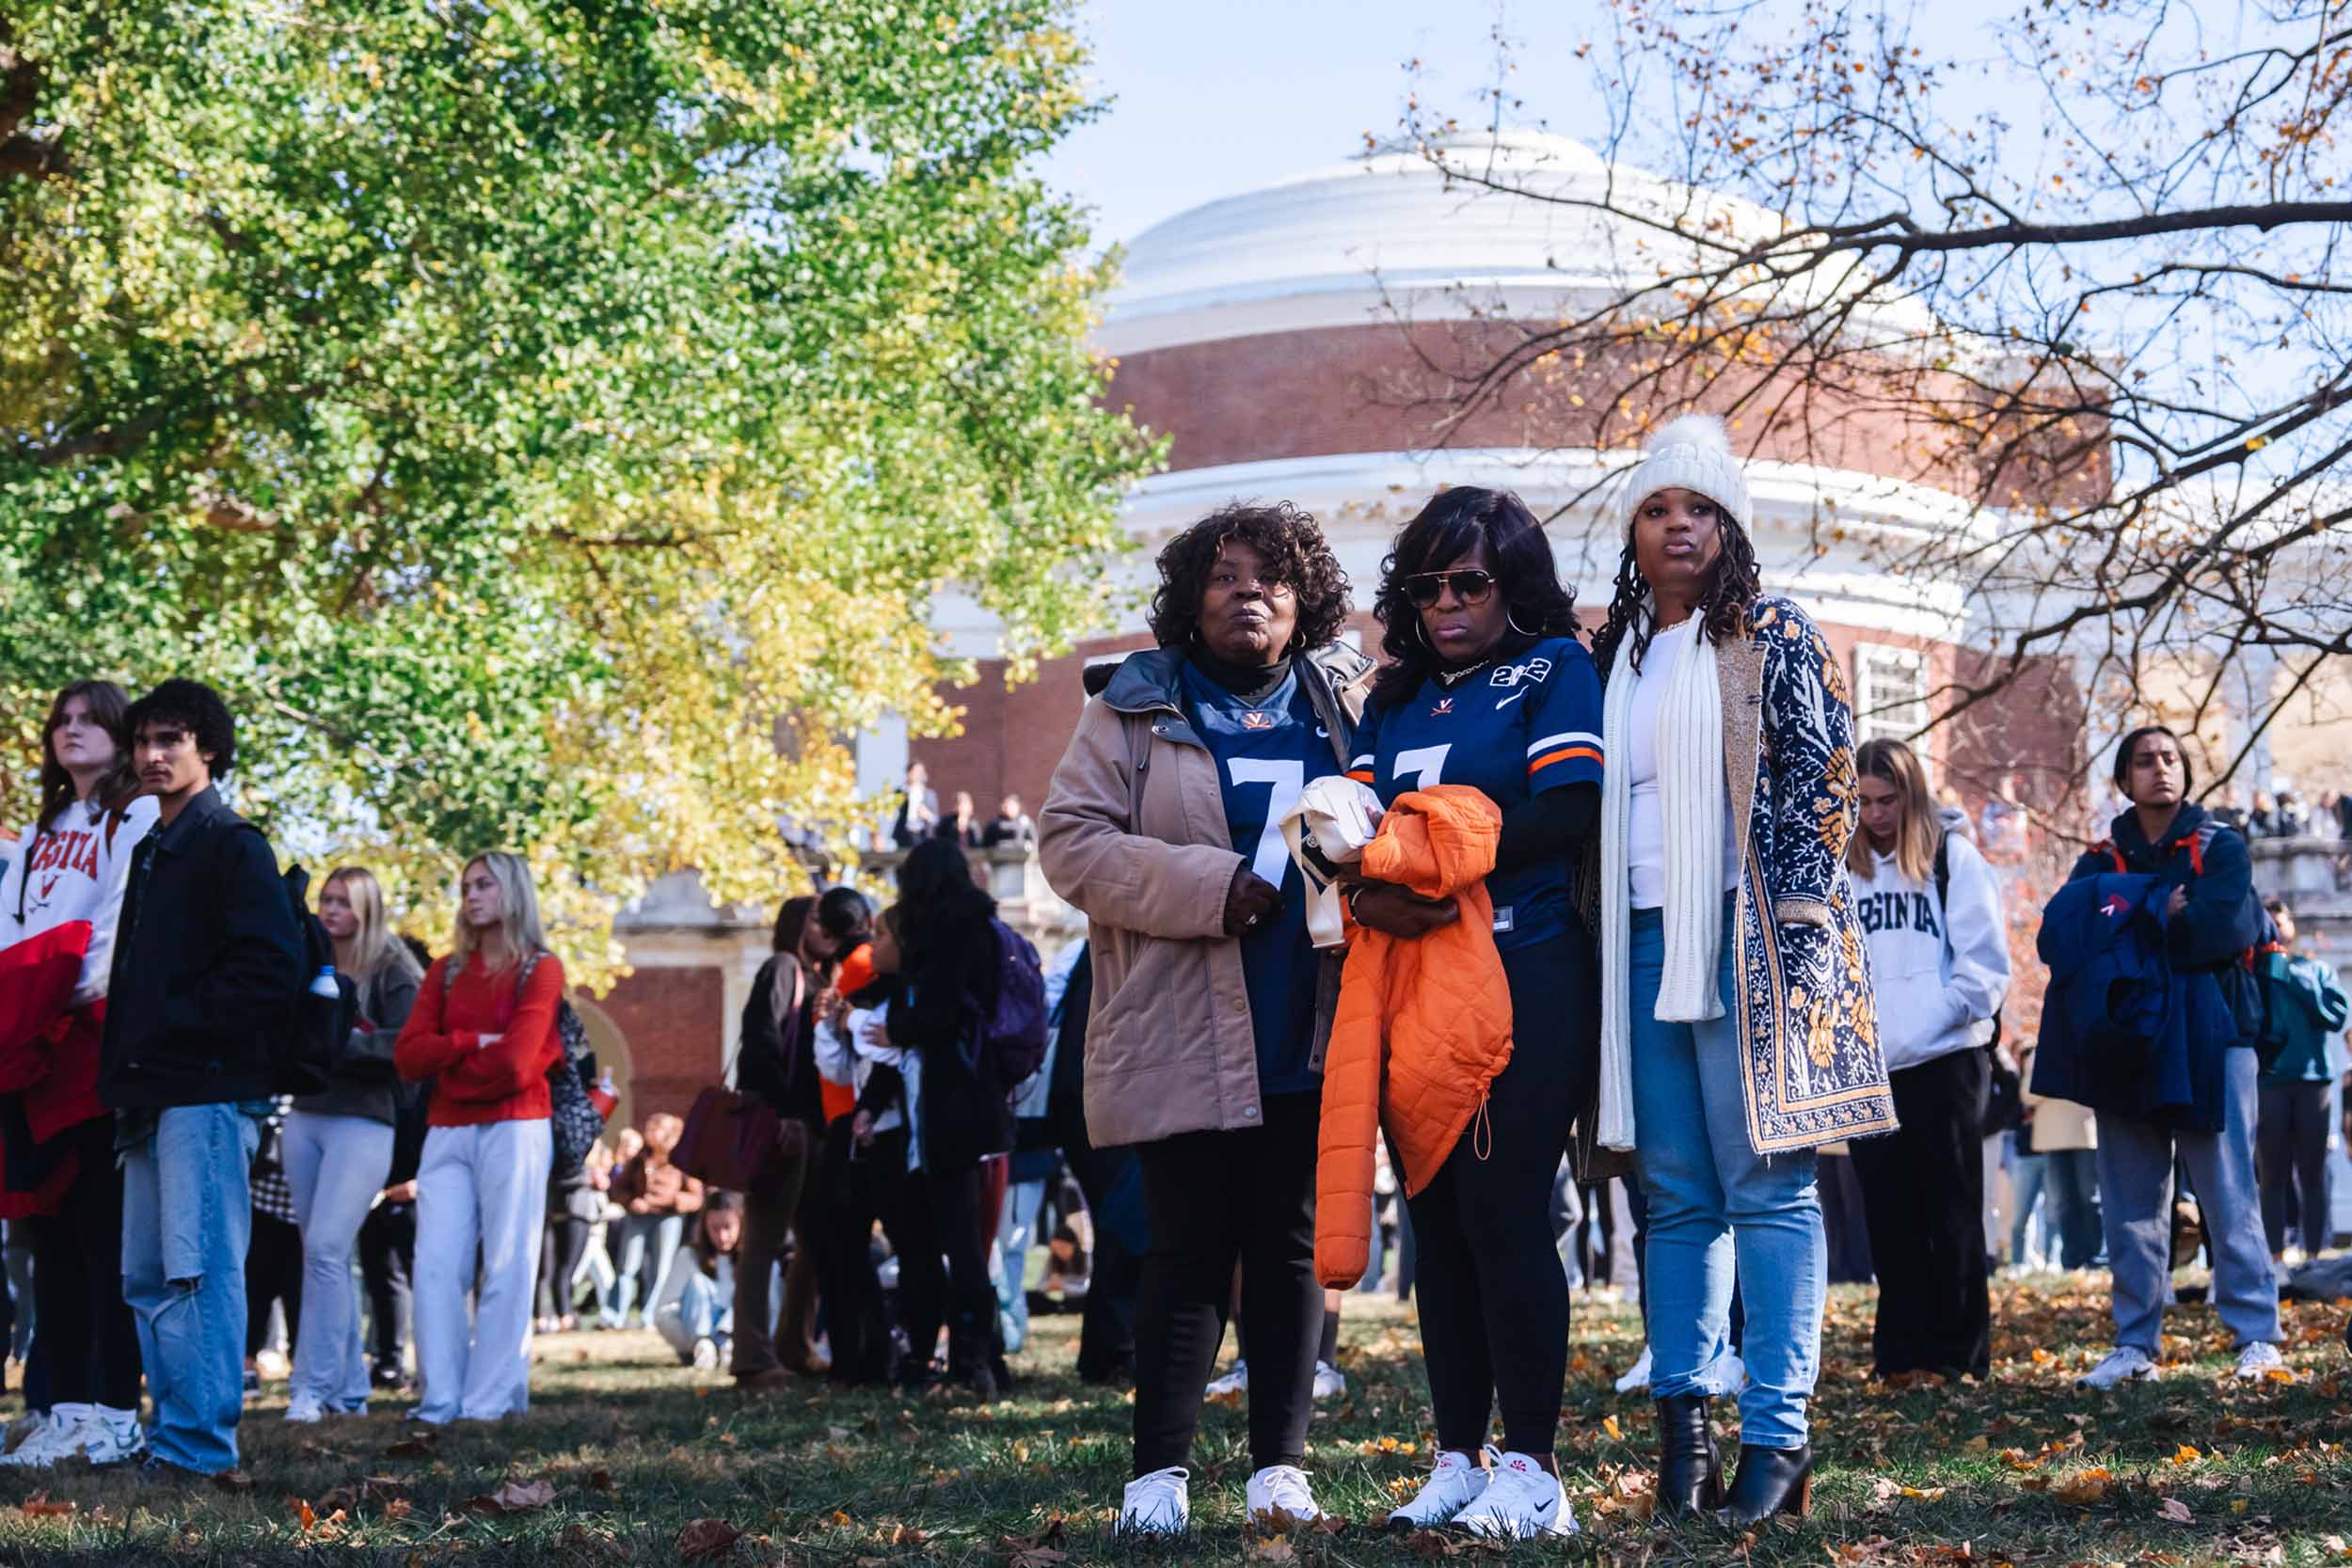 Members of the UVA community standing on the Lawn in mourning